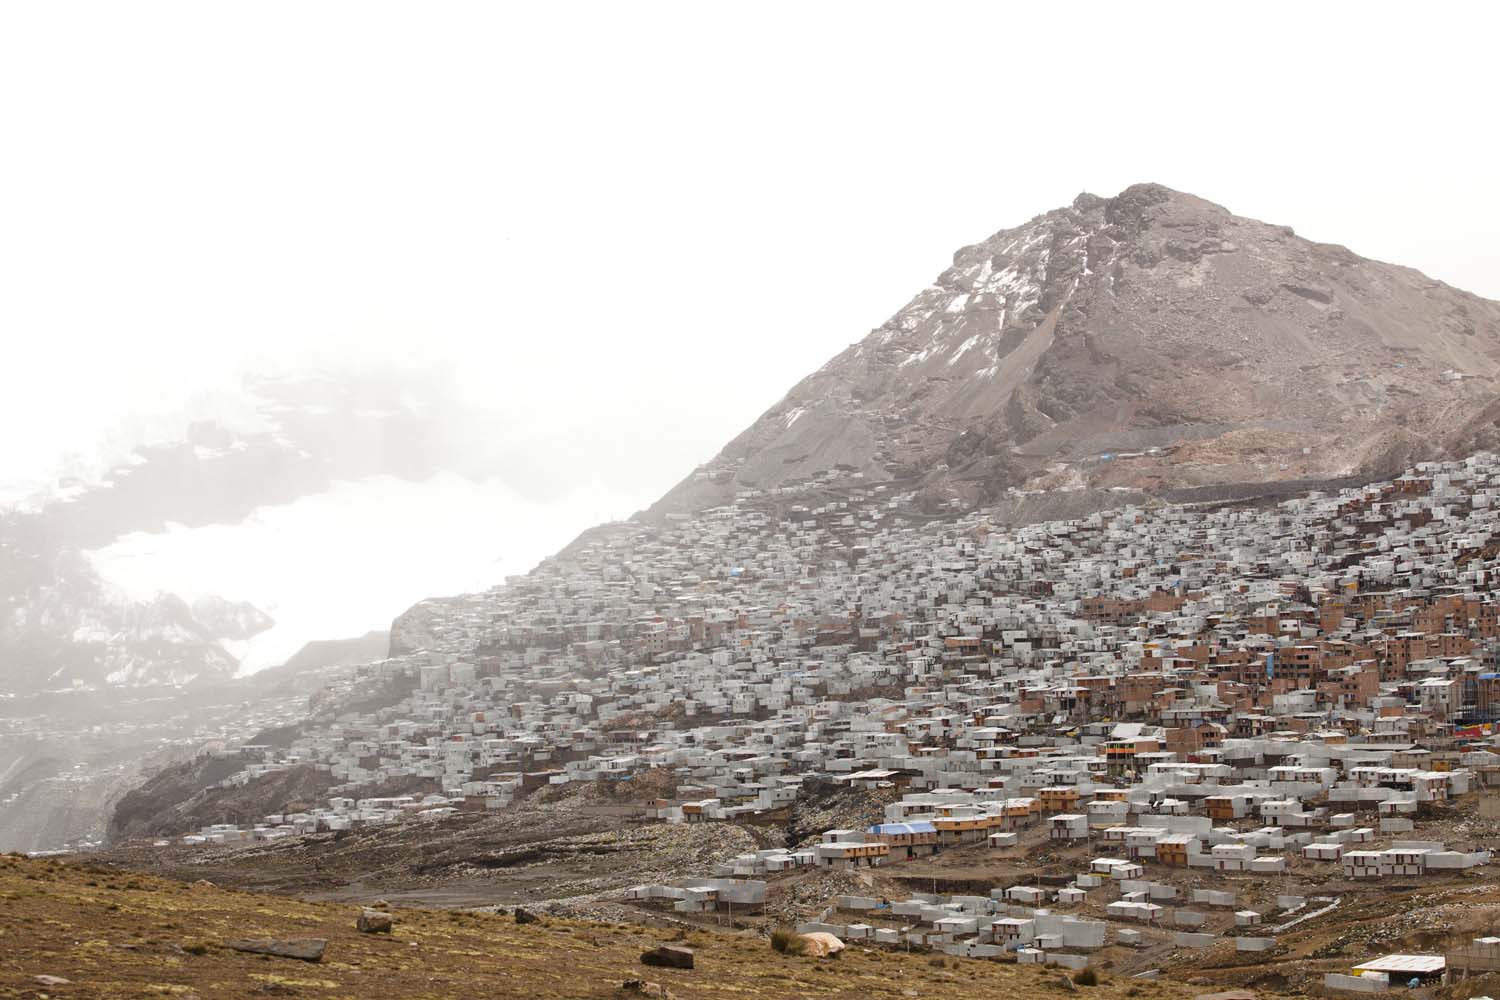 The approach to La Rinconada, a gold-mining town nestled under a glacier in the Peruvian Andes.